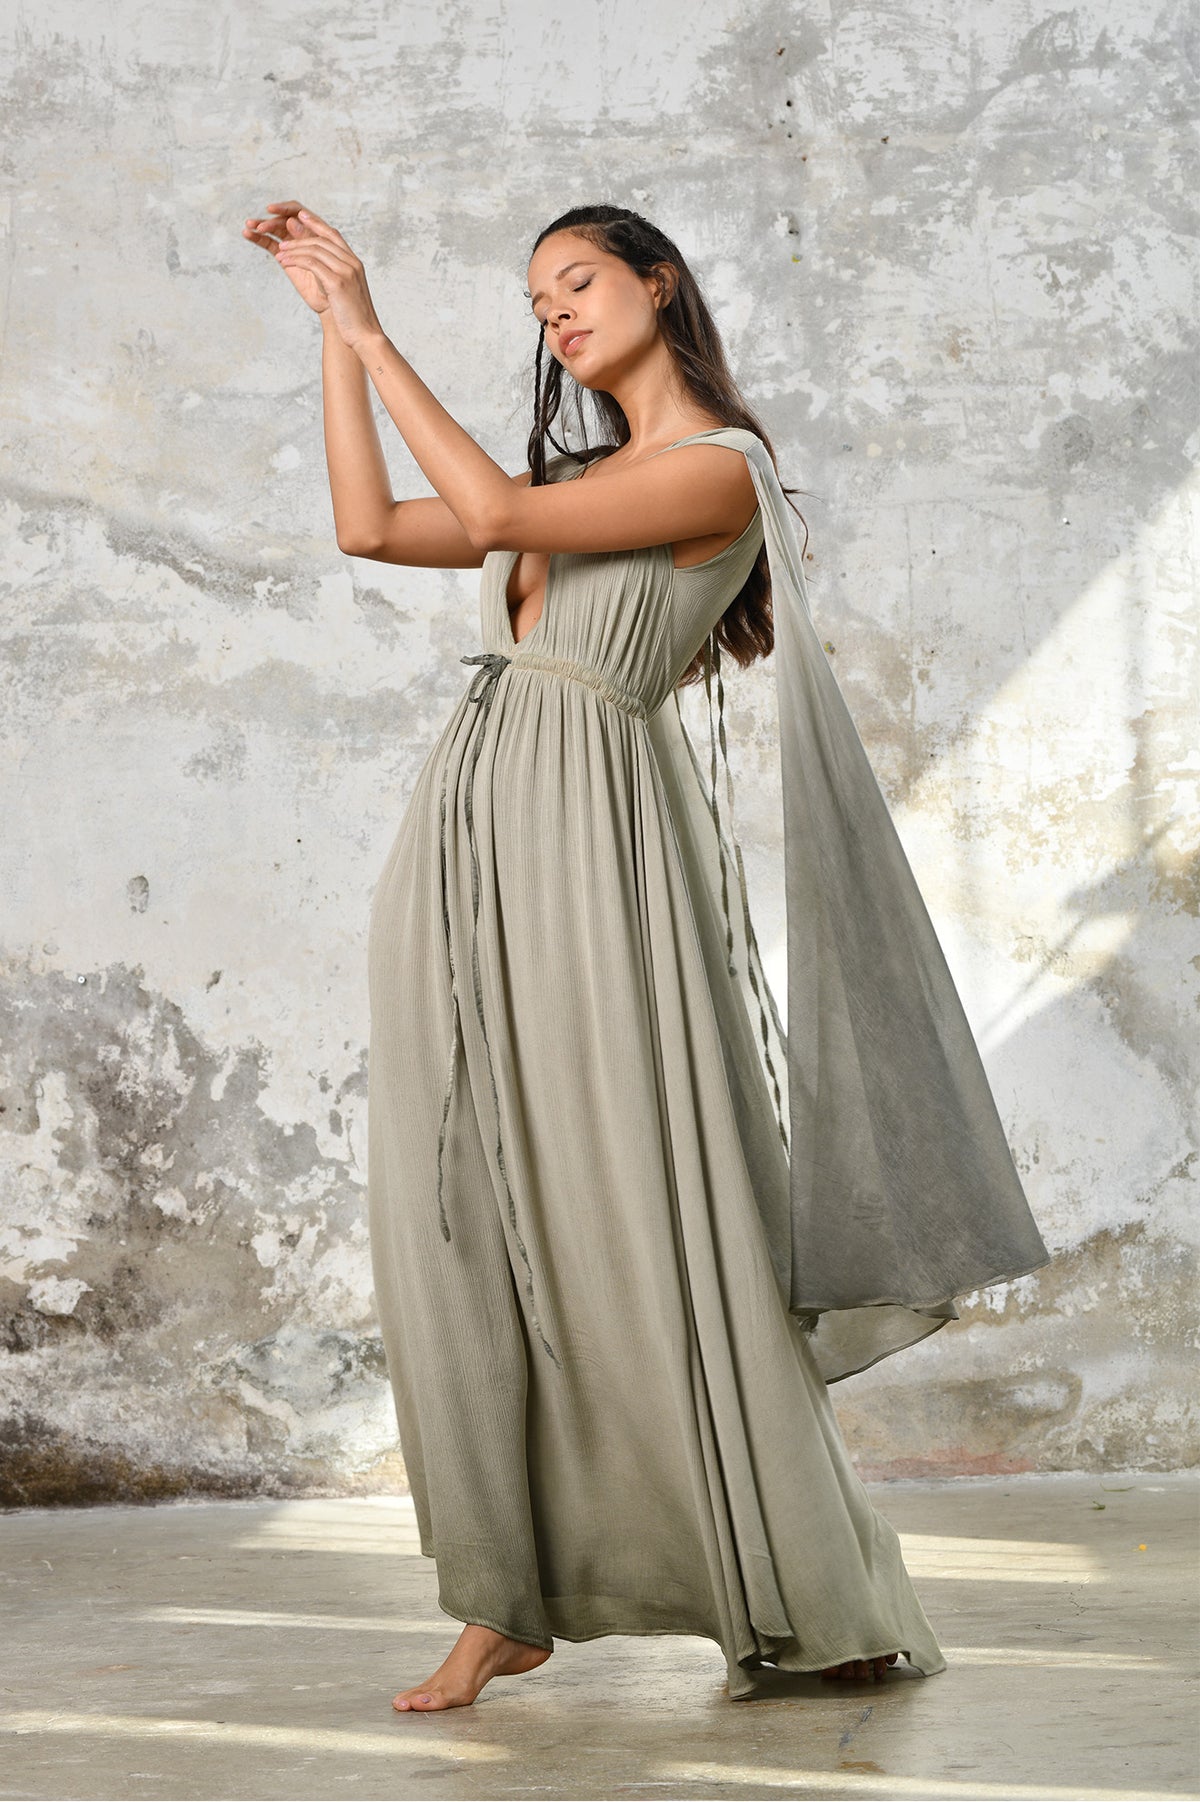 An enchanting Sage Green Greek Goddess Dress, perfect for any occasion. This elegant maxi dress features a flattering open back design, making it an ideal choice for a wedding guest or a bohemian-inspired event. The flowing, ethereal fabric and delicate details embody the essence of a Bohemian Gypsy Maxi Dress, exuding a Boho Sexy Elegant vibe.